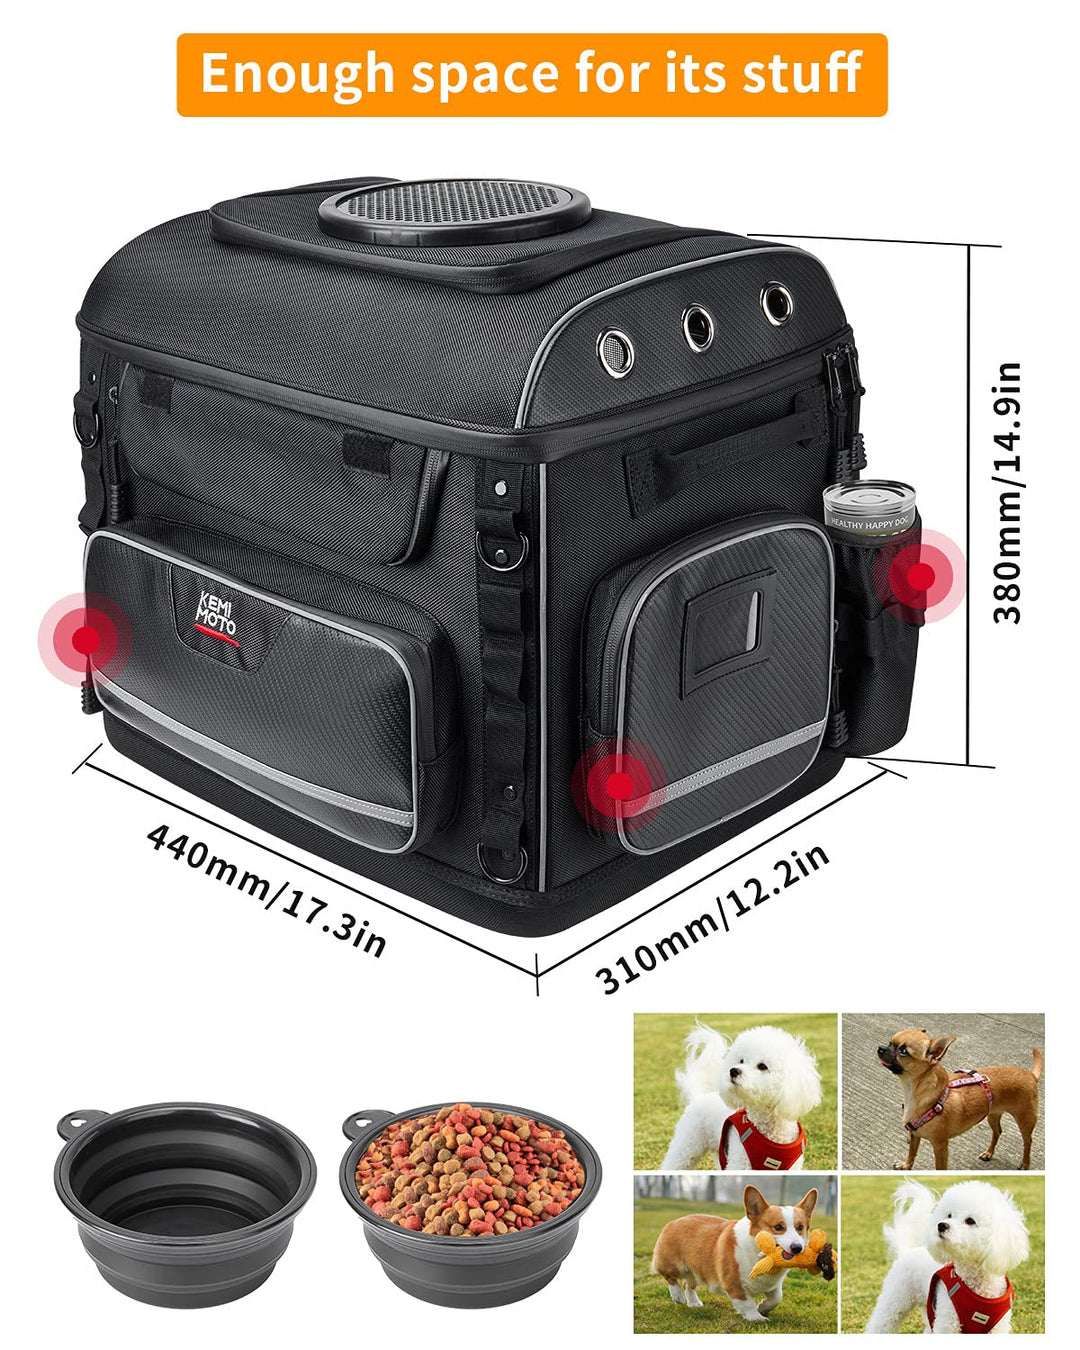 SOUNDY 1 Dog Carrier Cat Carriers Airline Approved Pet Carrier For